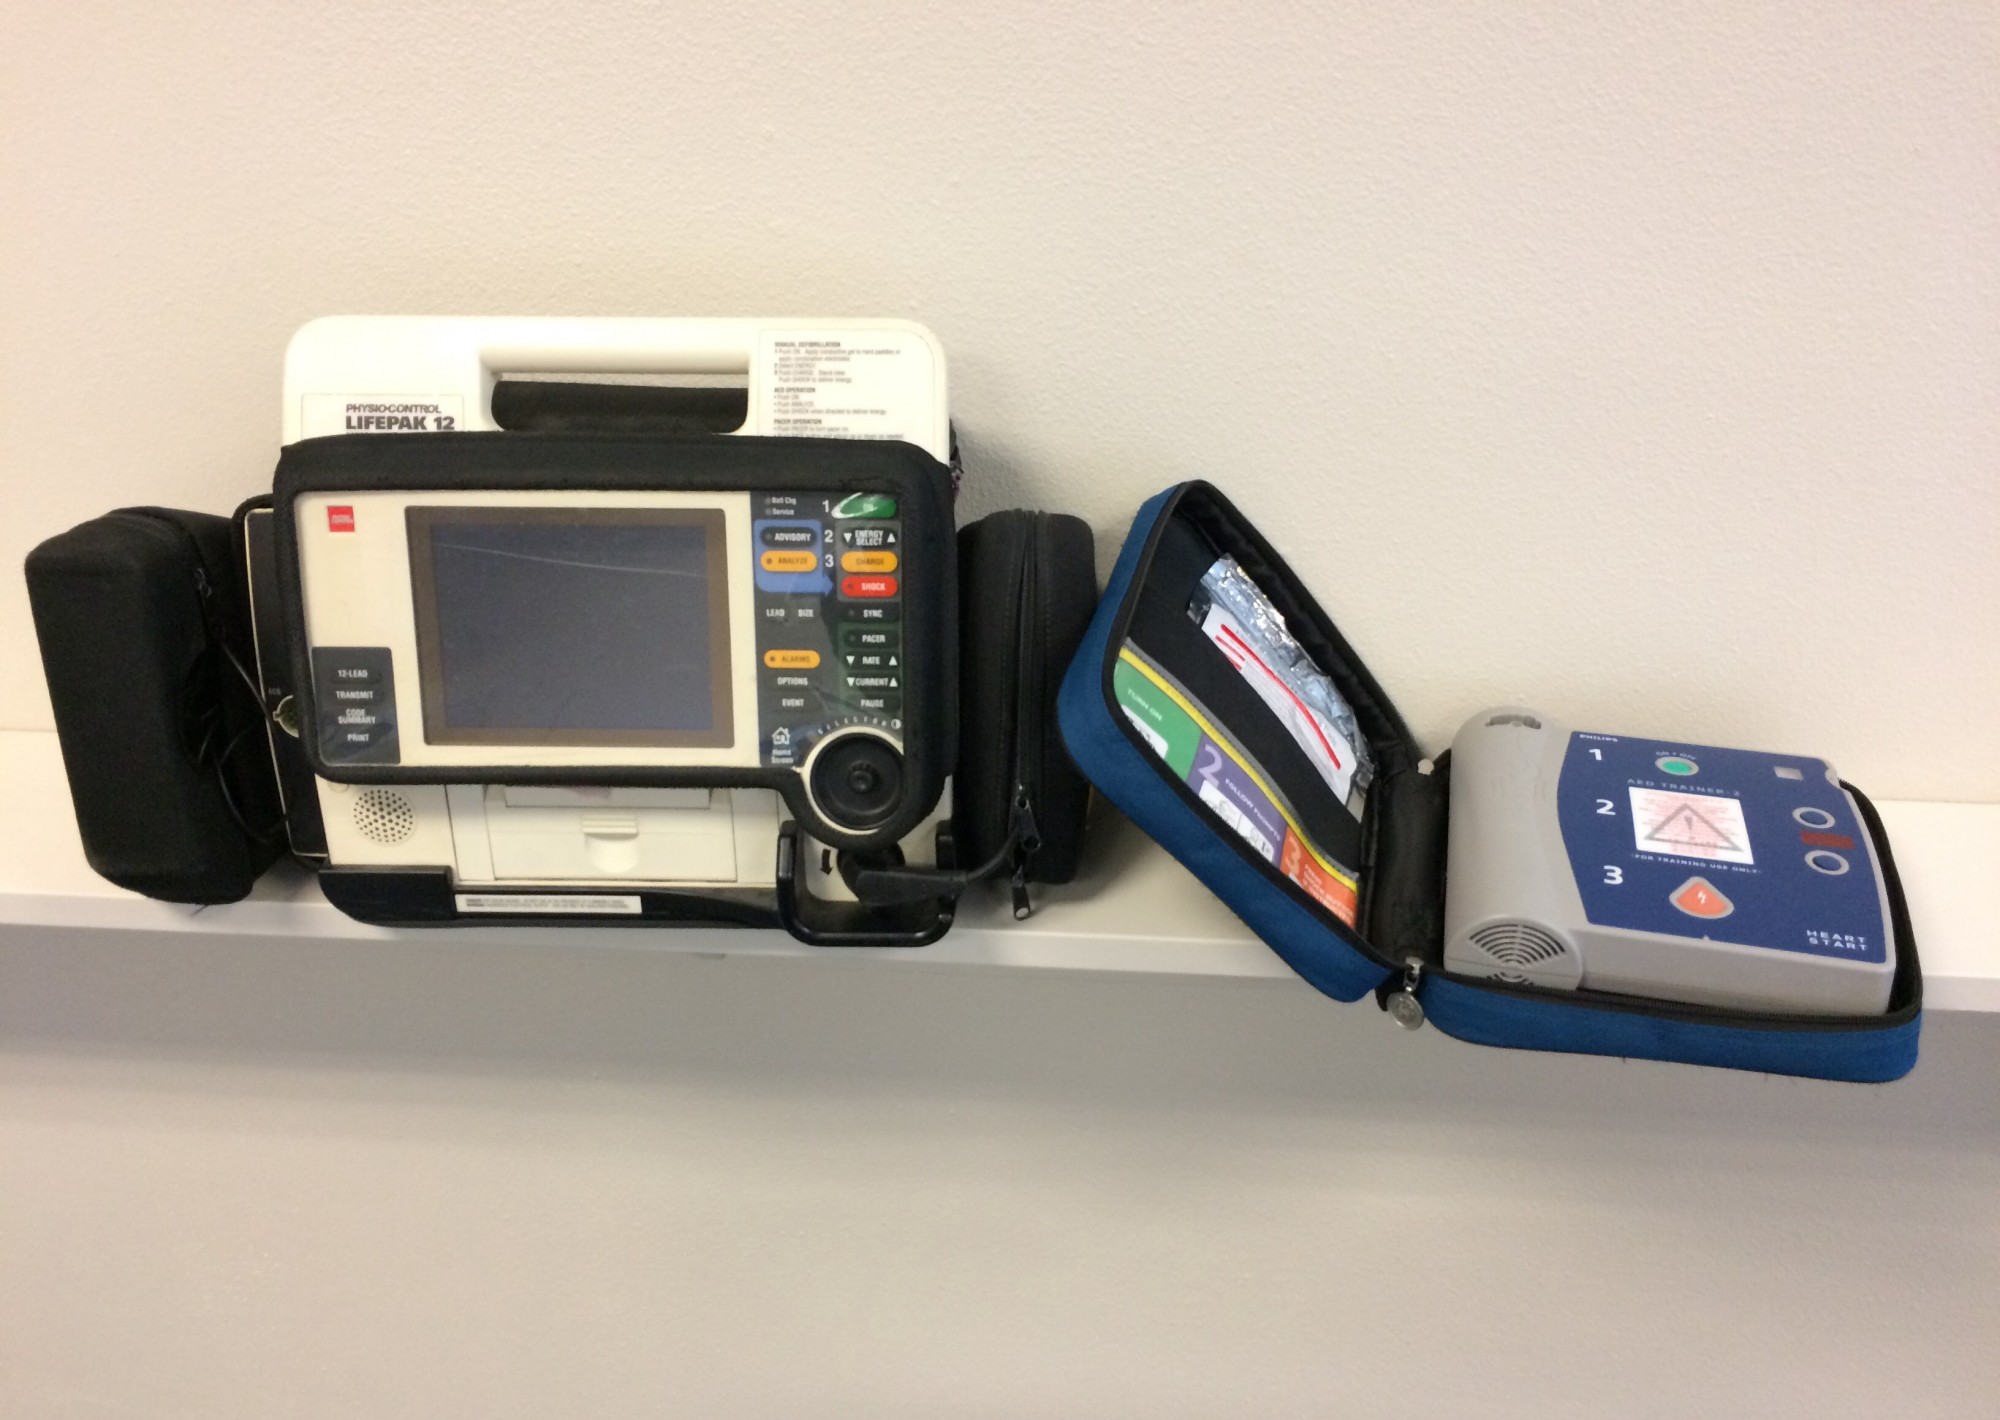 a picture of a manual defibrillator and an AED